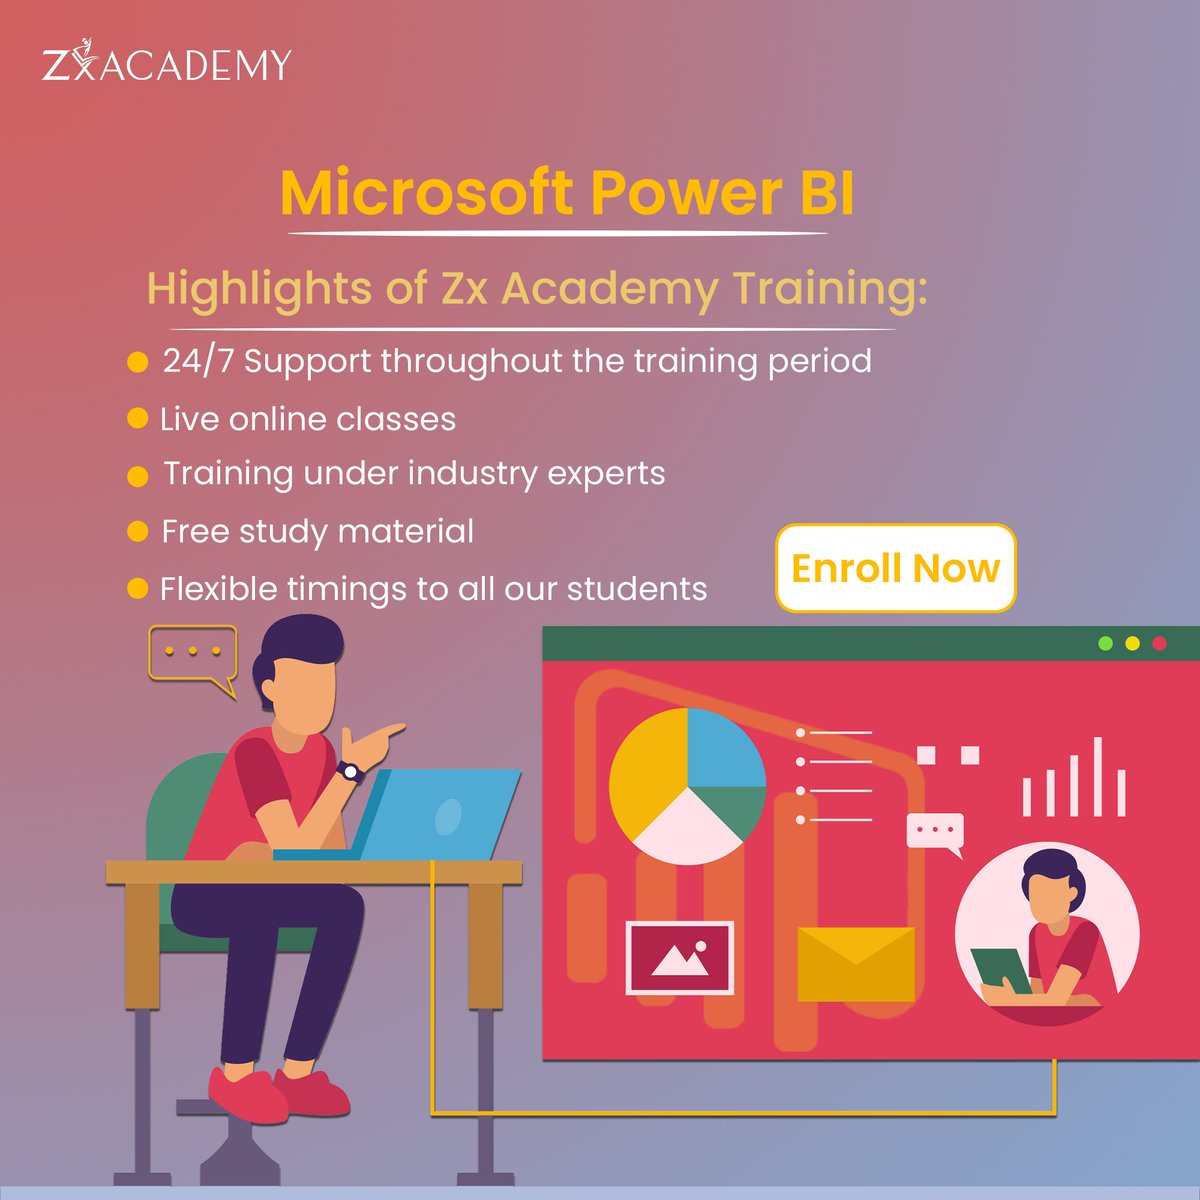 📷 Supercharge Your Career with Zx Academy Microsoft Power BI Certification Training! 📷📷
#MicrosoftPowerBI#ZxAcademy#PowerBI#DataCertification#MicrosoftCertification#PowerBIcertification#DataAnalysis#BusinessIntelligence#DataScience#ITcertification#Onlinelearning#Hyderabad